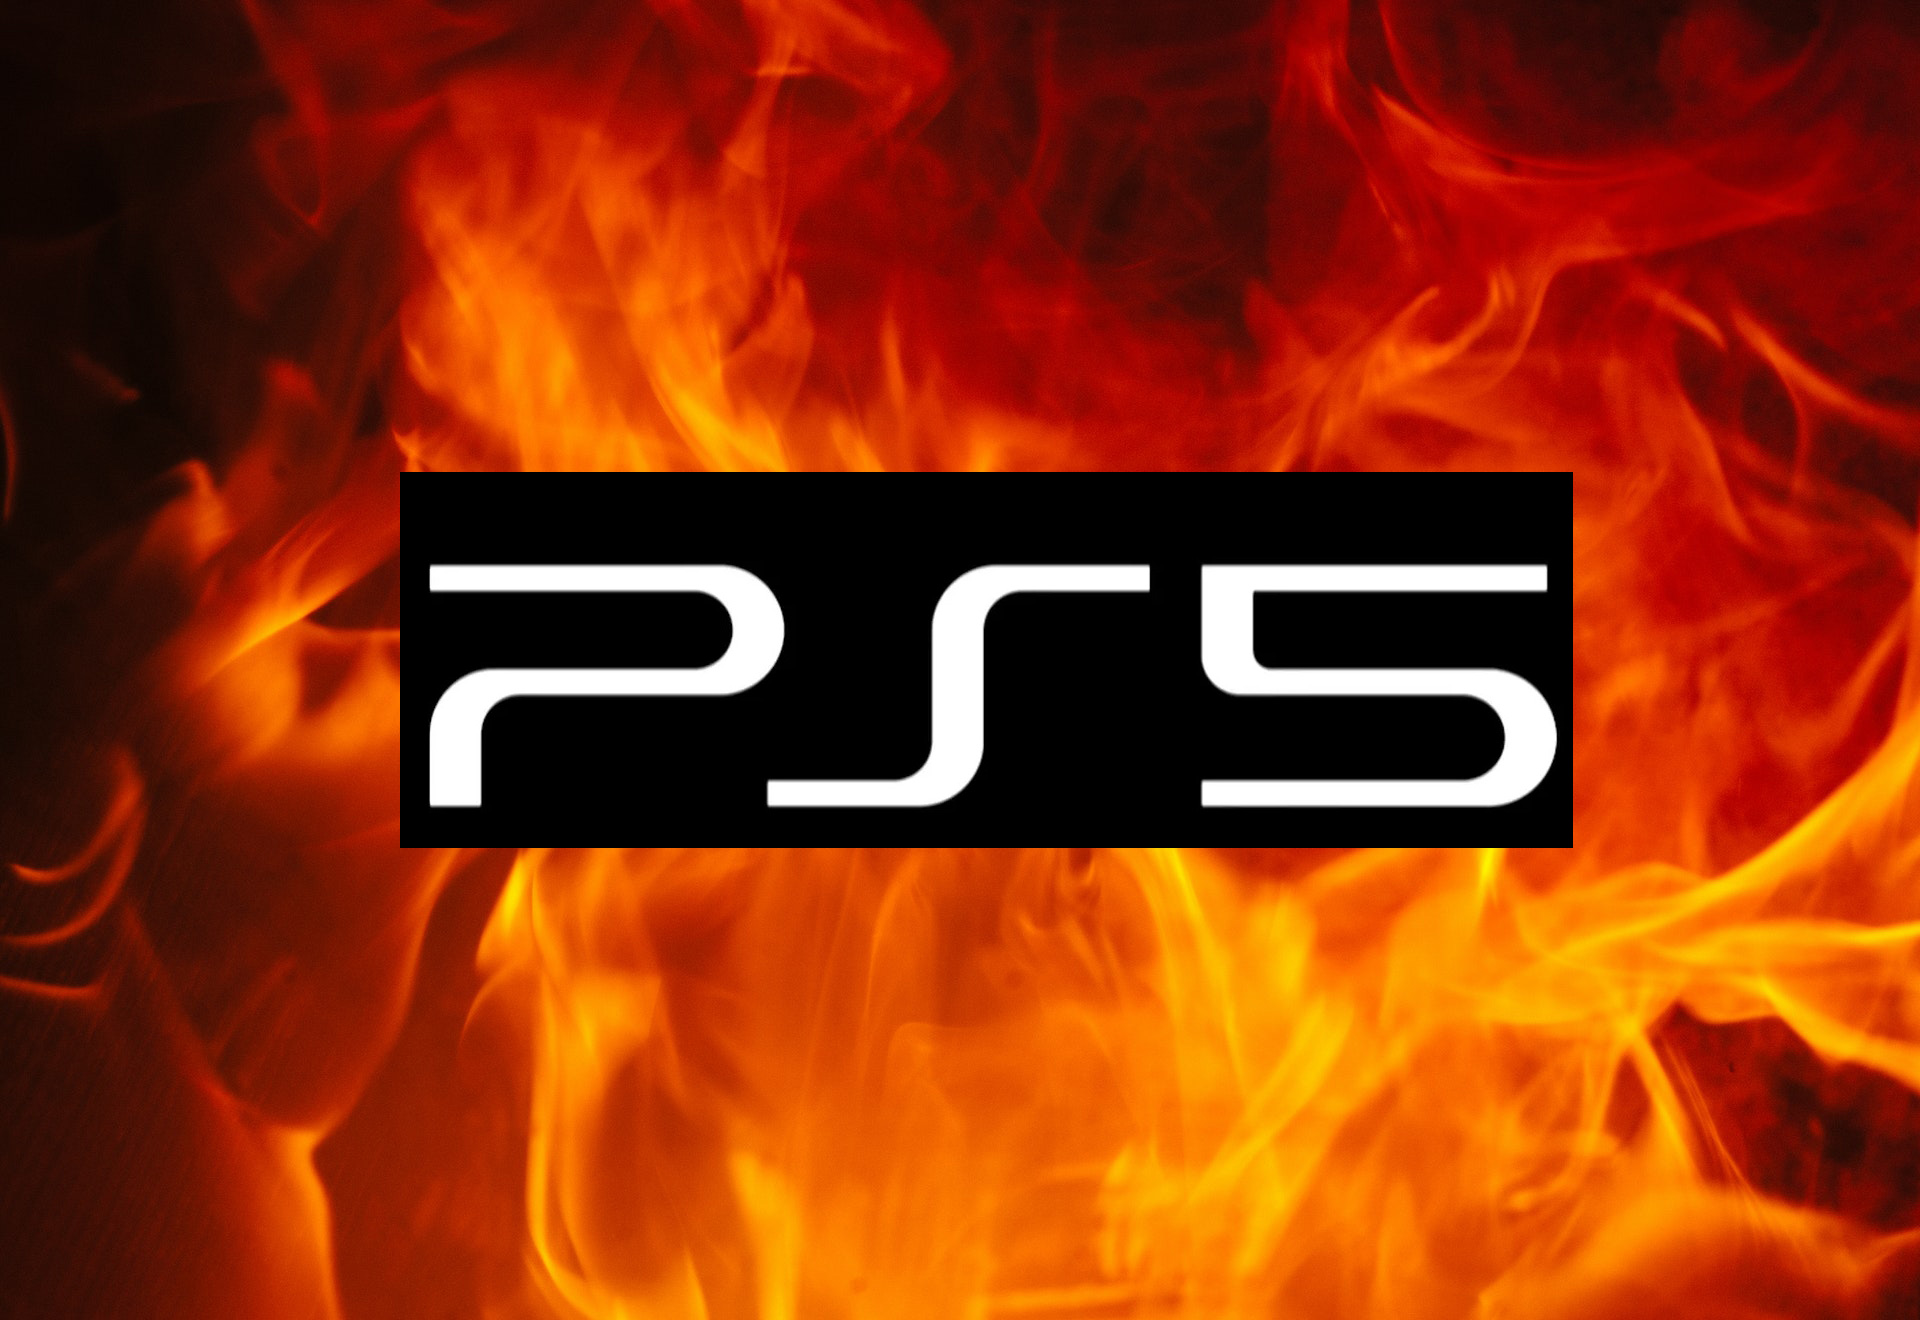 RUMOR: Unnamed Devs Say PS5 Hardware is Difficult to Optimize for and Overheating